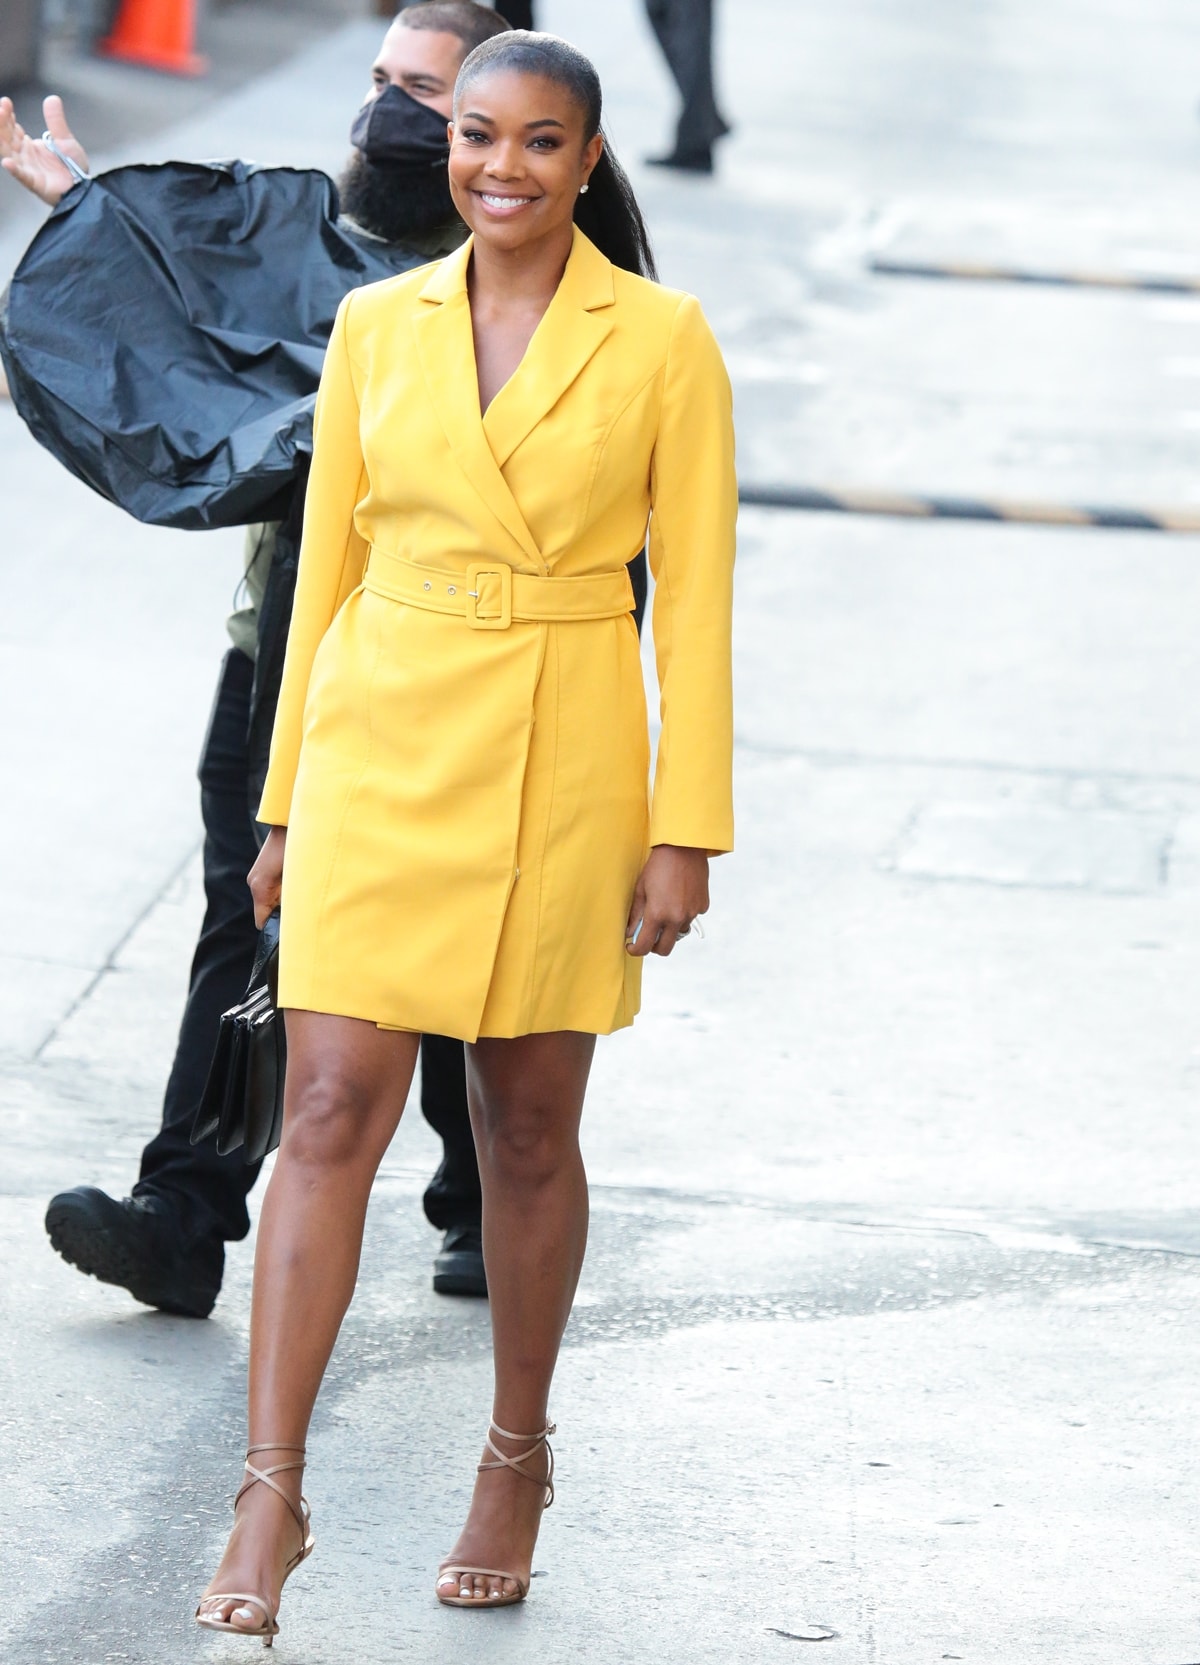 Gabrielle Union flaunts her legs in a yellow trench coat and ankle-strap heels